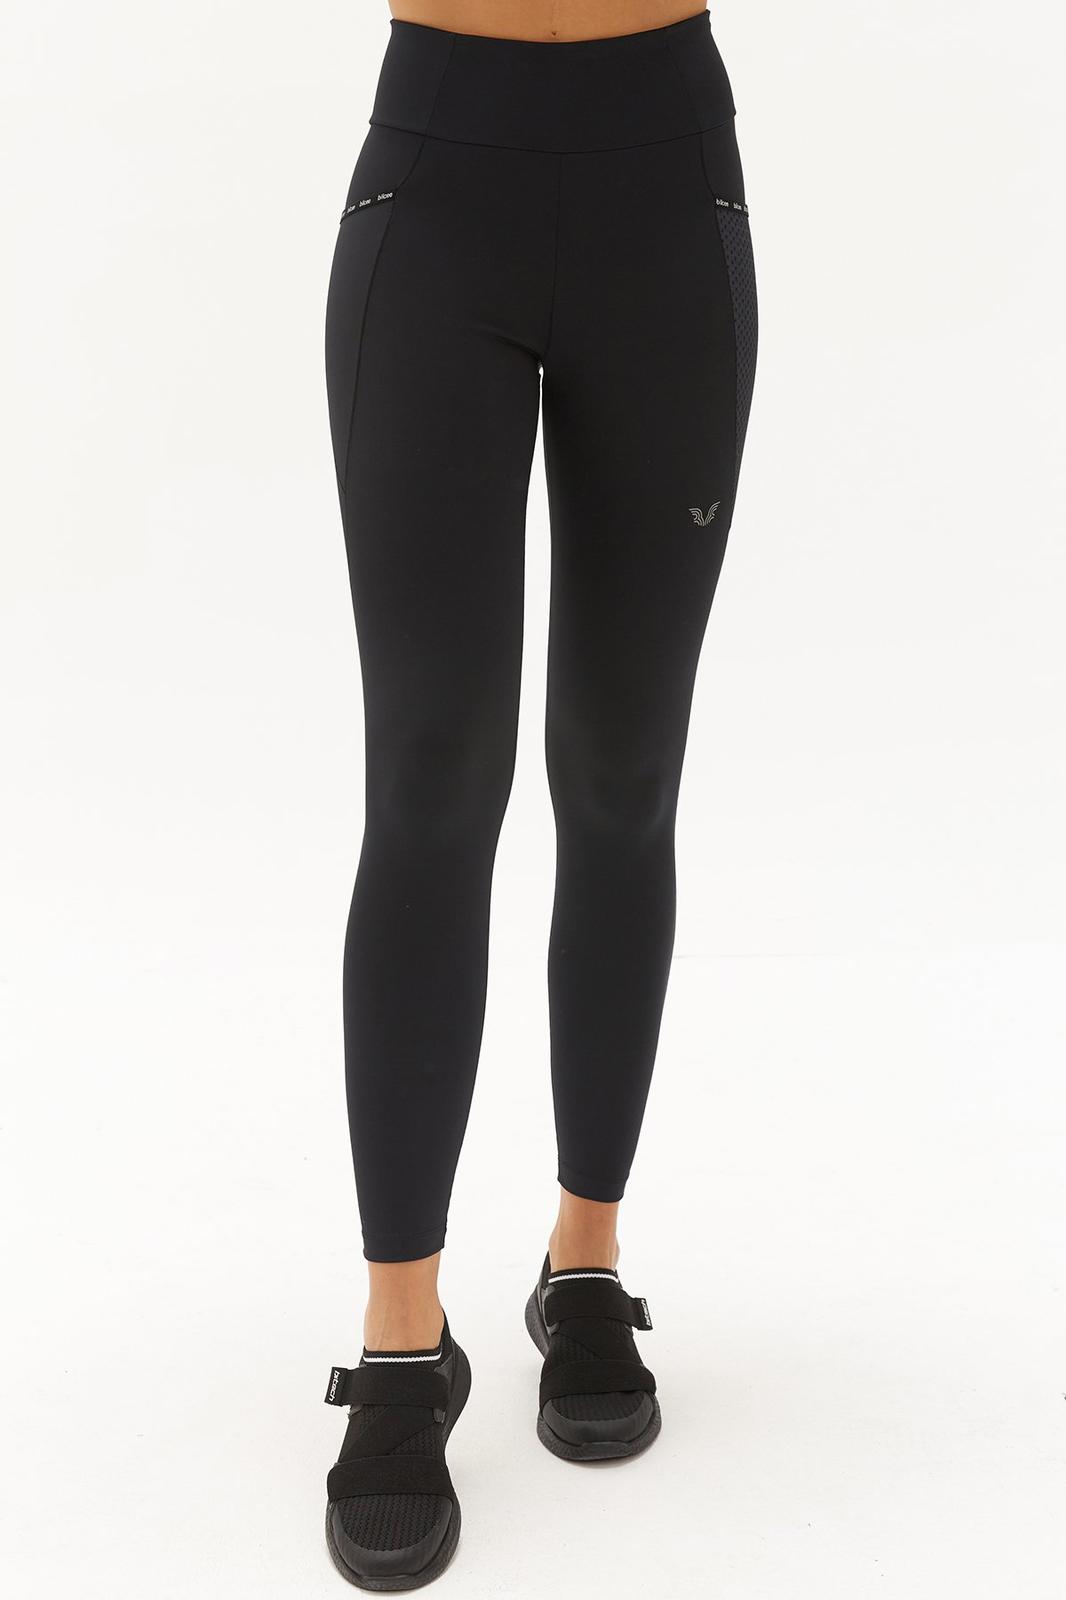 High-Waisted Black Leggings with Mesh pockets